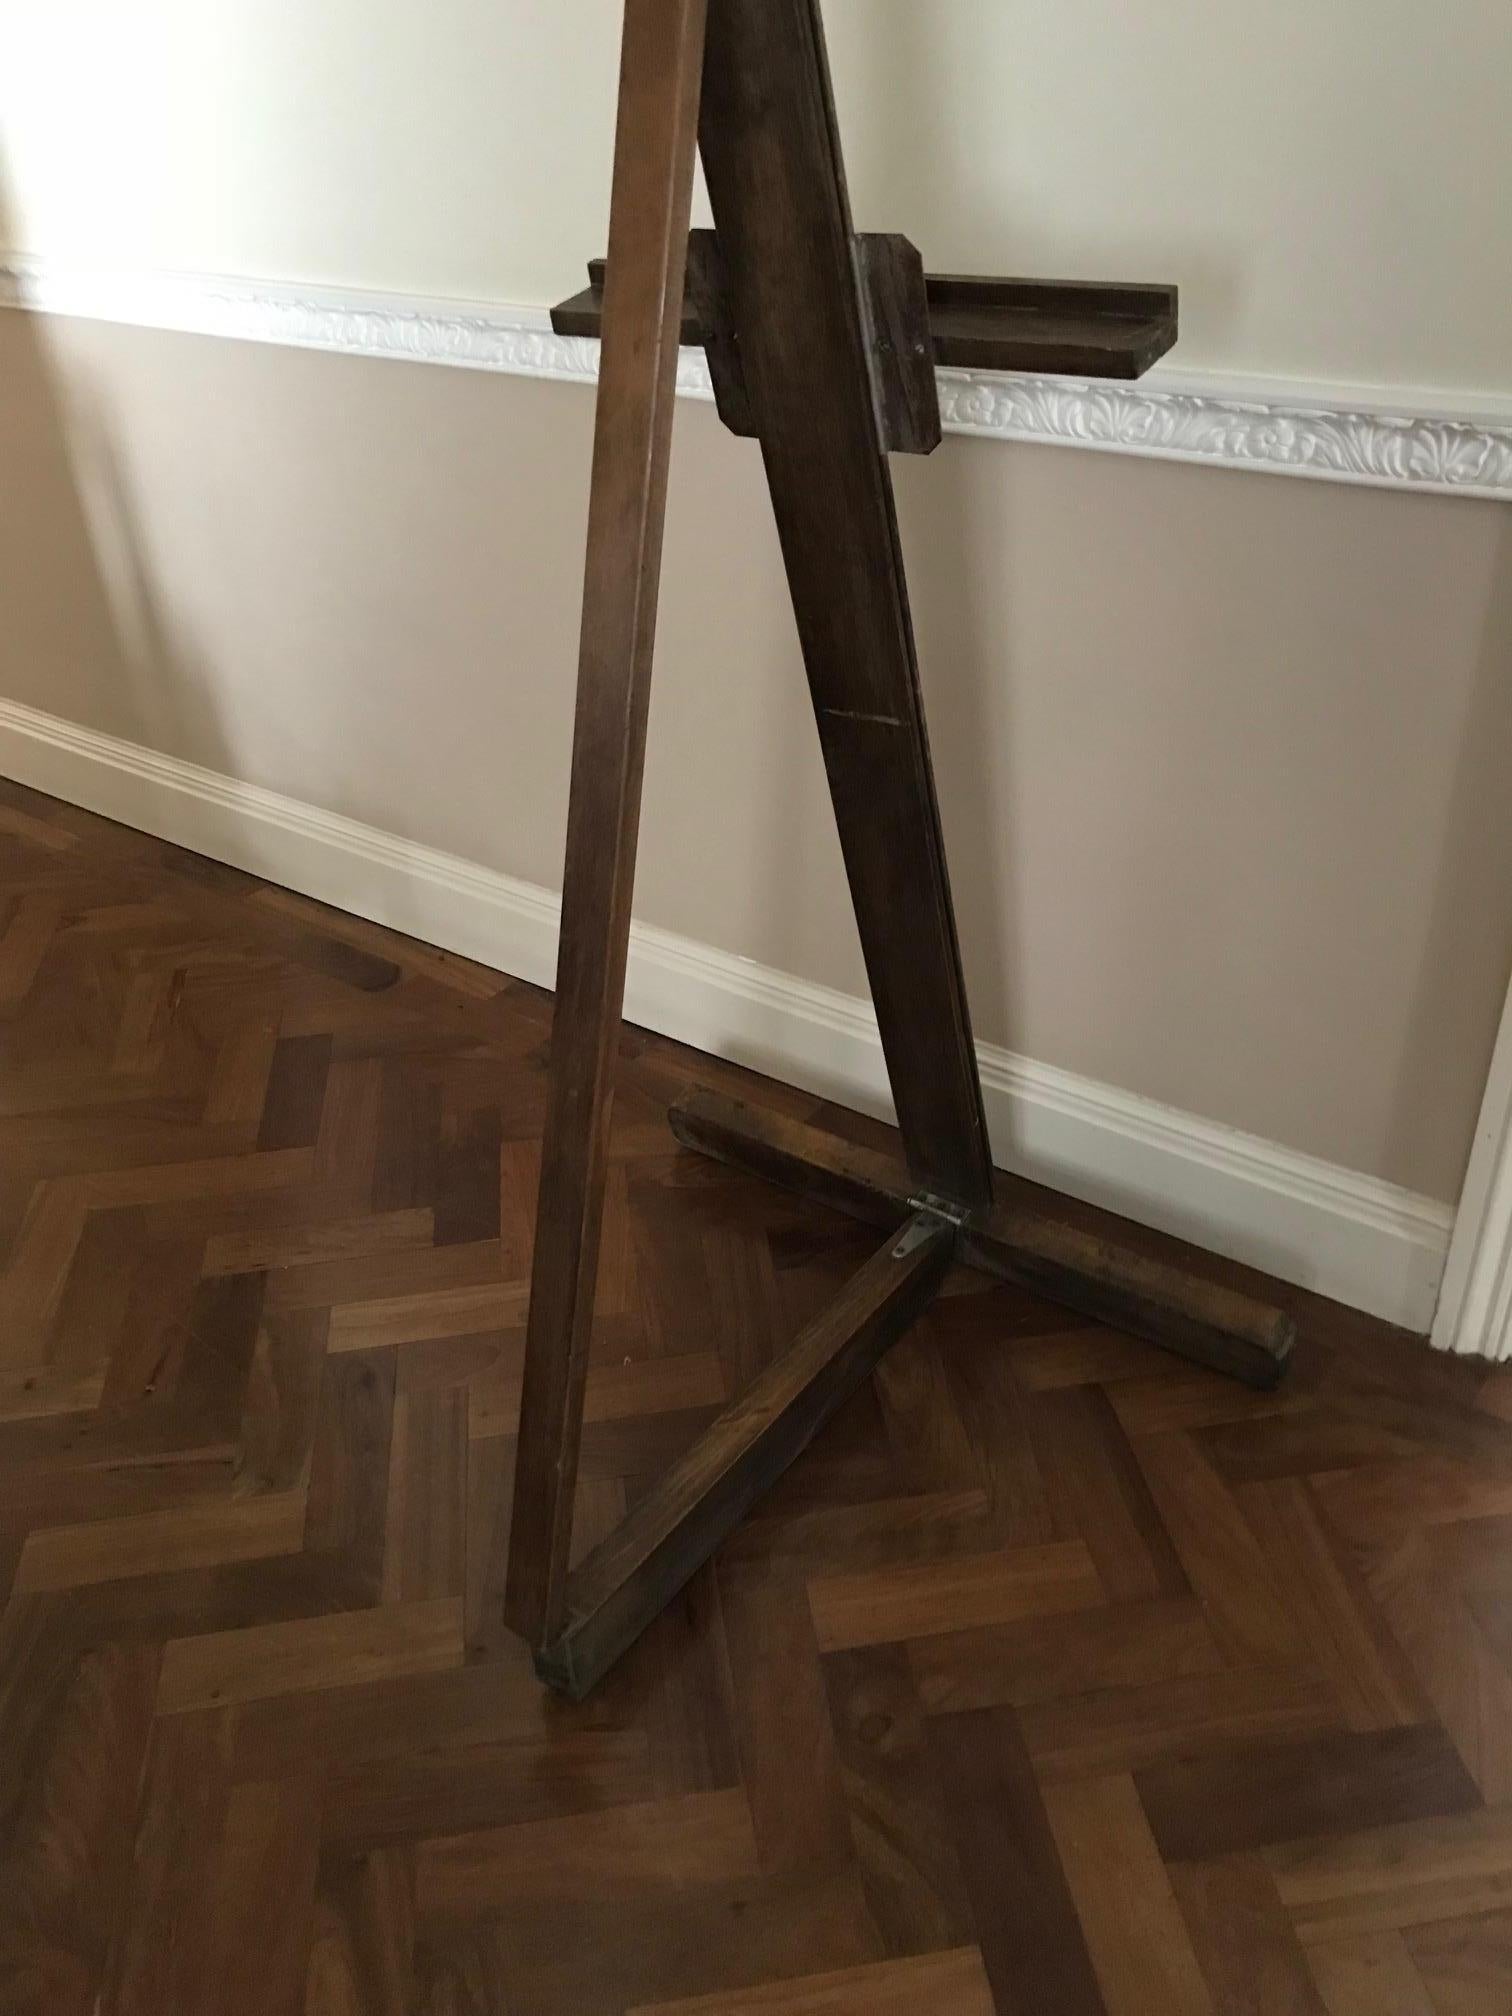 A good example of a collapsible Anco Bilt American wooden easel. Has been cleaned but not overly, leaving some traces of artists paint which gives the easel character and charm. A great sculptural easel which can stand alone as decoration or be used